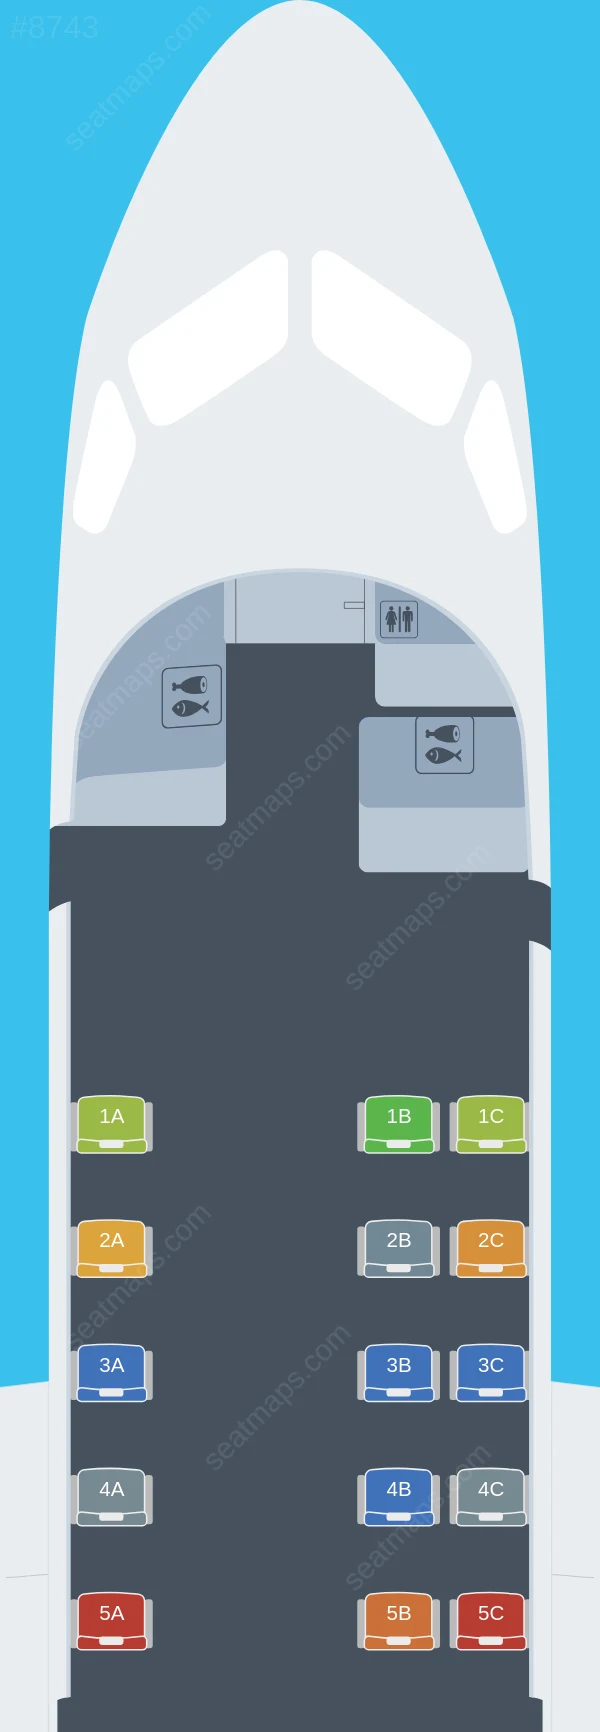 Lipican Aer Saab S340 seatmap preview